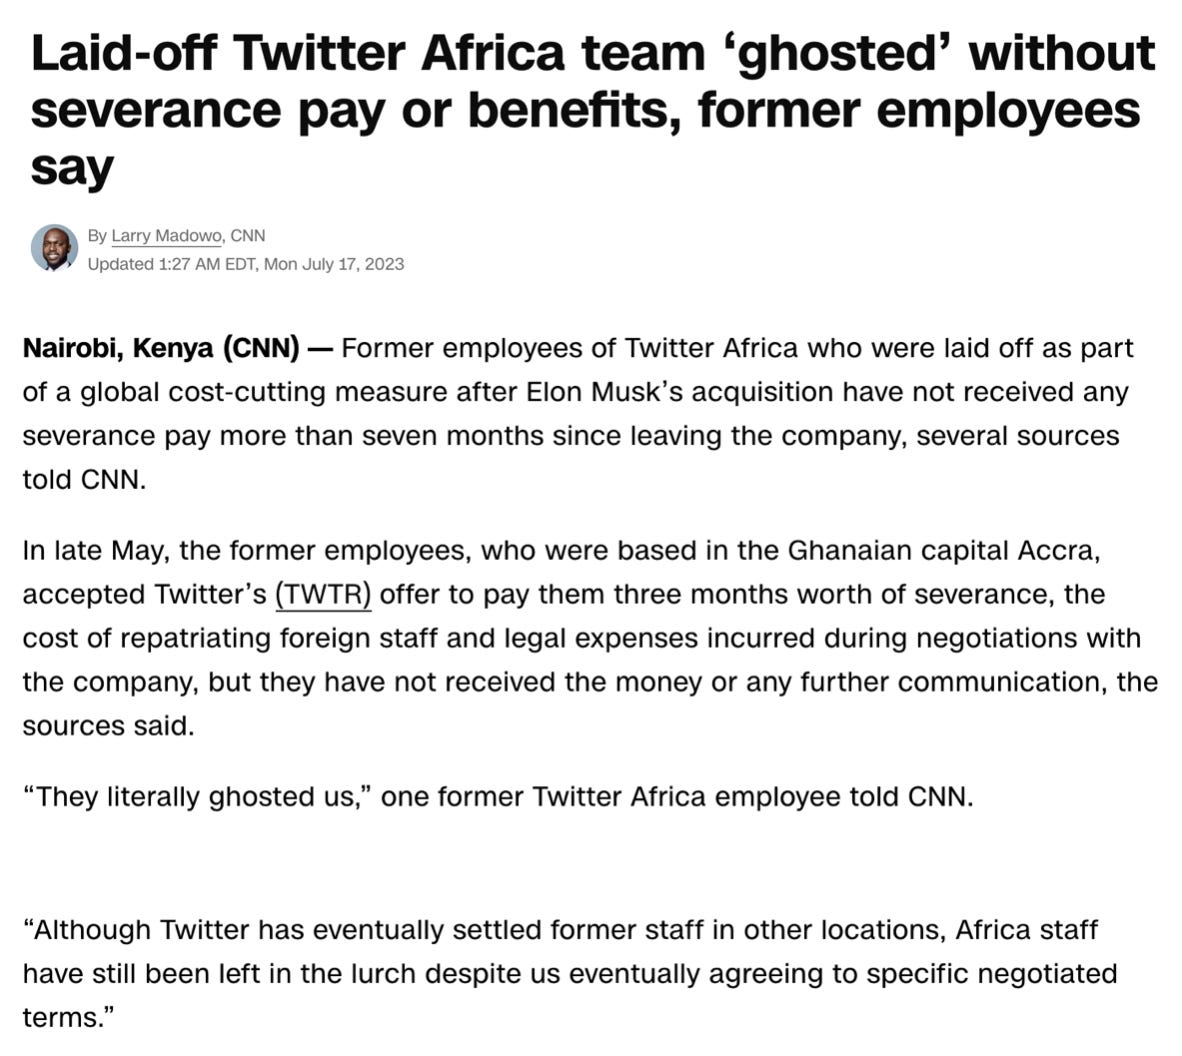 Screenshot of a CNN article titled "Laid-off Twitter Africa team 'ghosted" without severance pay or benefits, former employees say